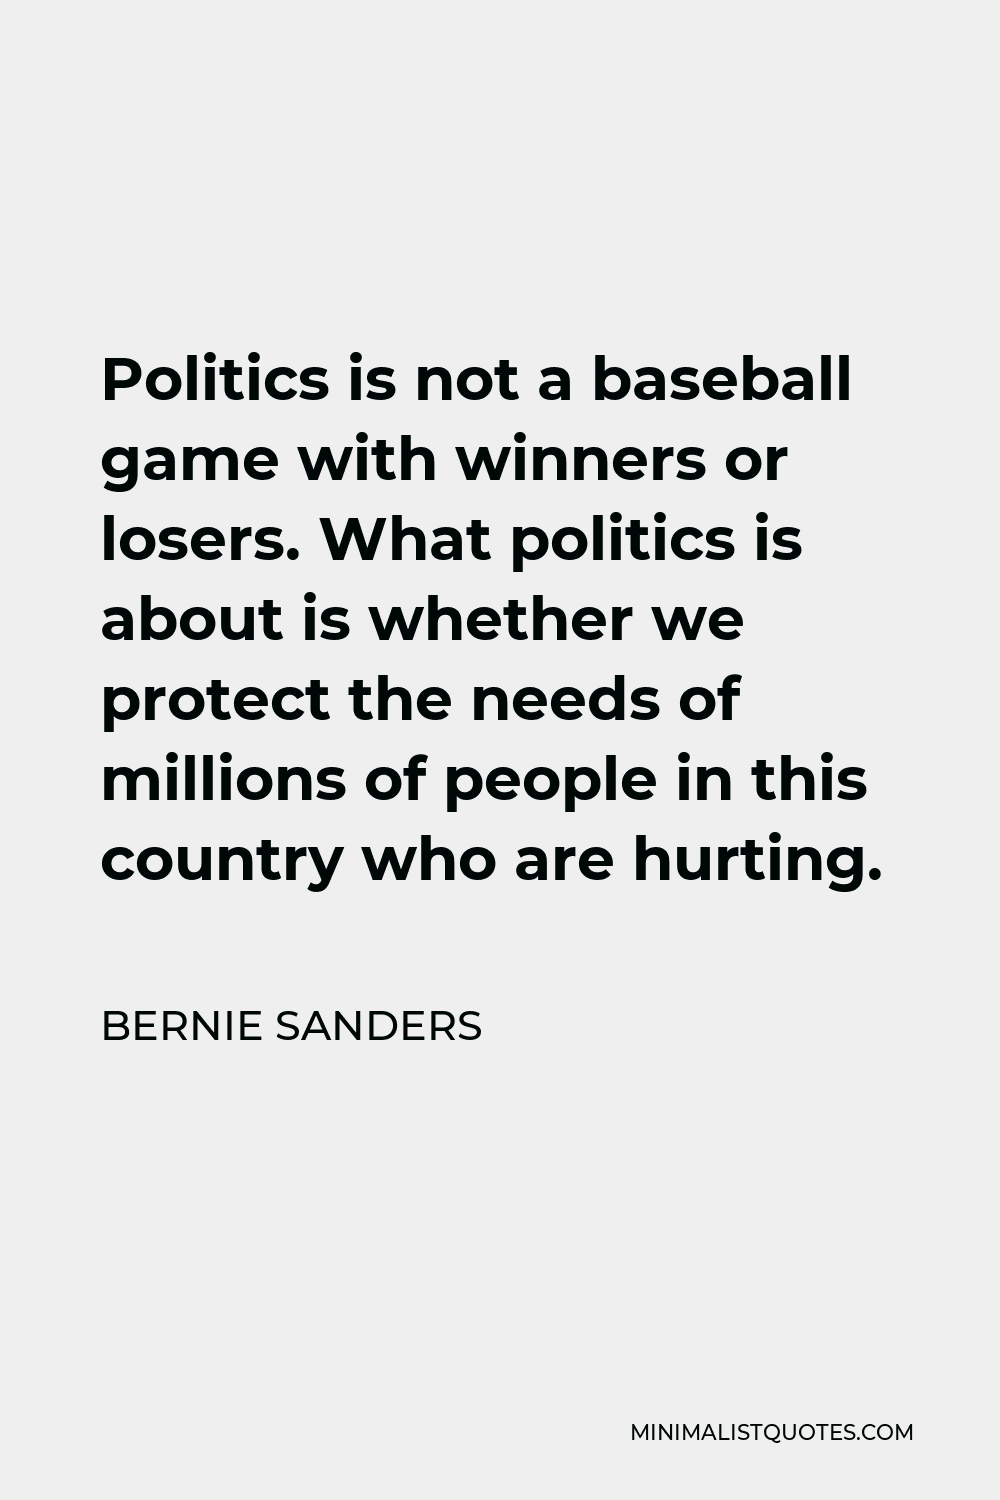 Bernie Sanders Quote - Politics is not a baseball game with winners or losers. What politics is about is whether we protect the needs of millions of people in this country who are hurting.